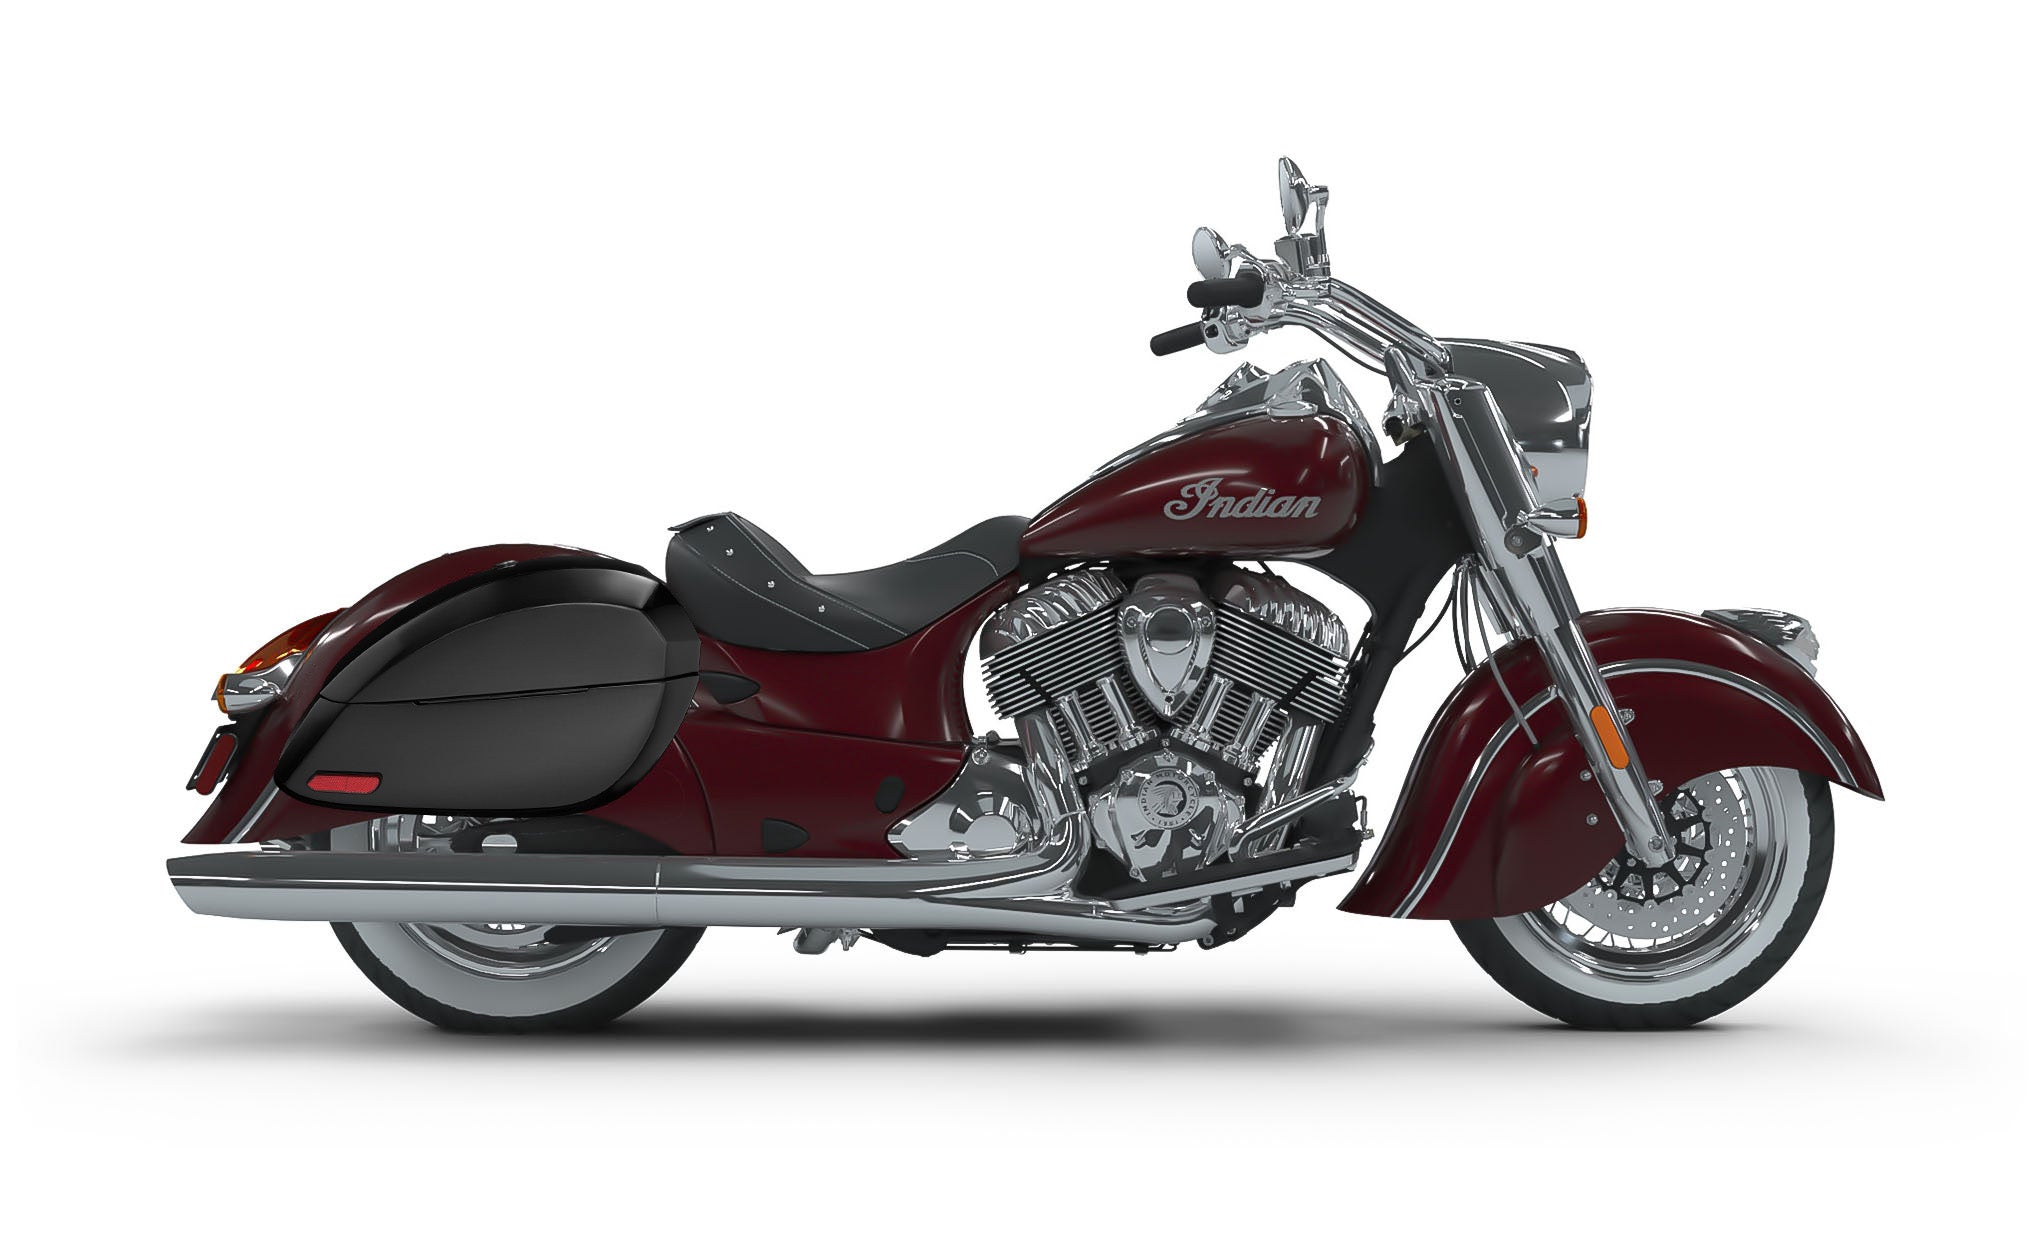 Viking Phantom Large Indian Chief Classic Painted Motorcycle Hard Saddlebags Engineering Excellence with Bag on Bike @expand